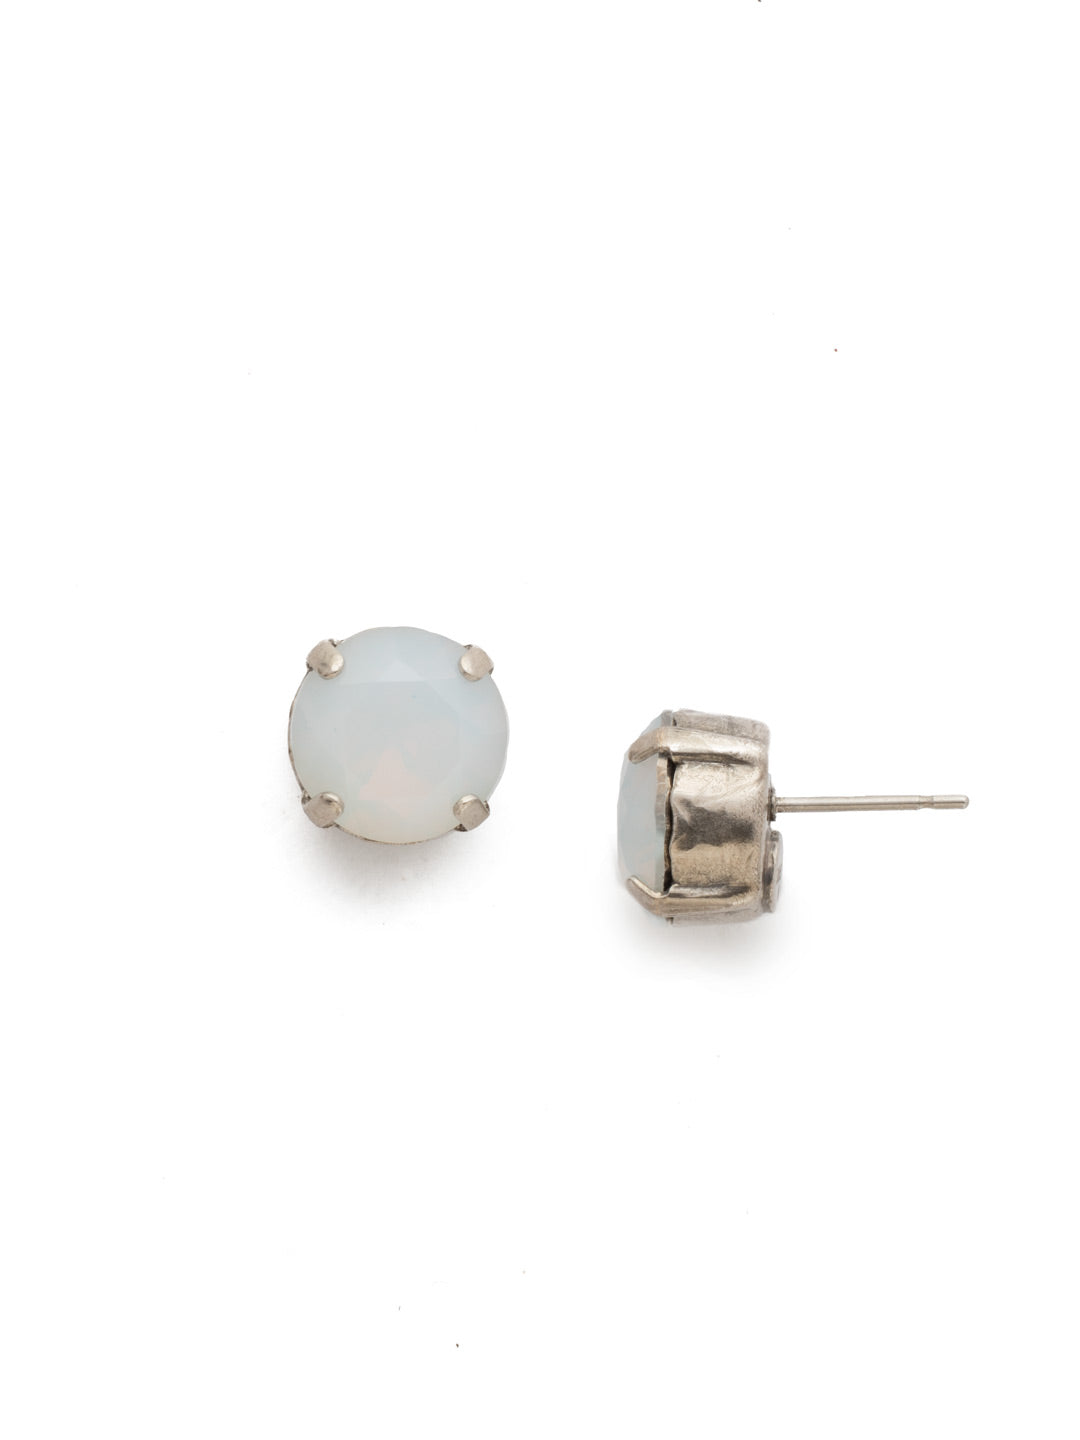 London Stud Earrings - ECM14ASWO - <p>Everyone needs a great pair of studs. Add some classic sparkle to any occasion with these stud earrings. Need help picking a stud? <a href="https://www.sorrelli.com/blogs/sisterhood/round-stud-earrings-101-a-rundown-of-sizes-styles-and-sparkle">Check out our size guide!</a> From Sorrelli's White Opal collection in our Antique Silver-tone finish.</p>